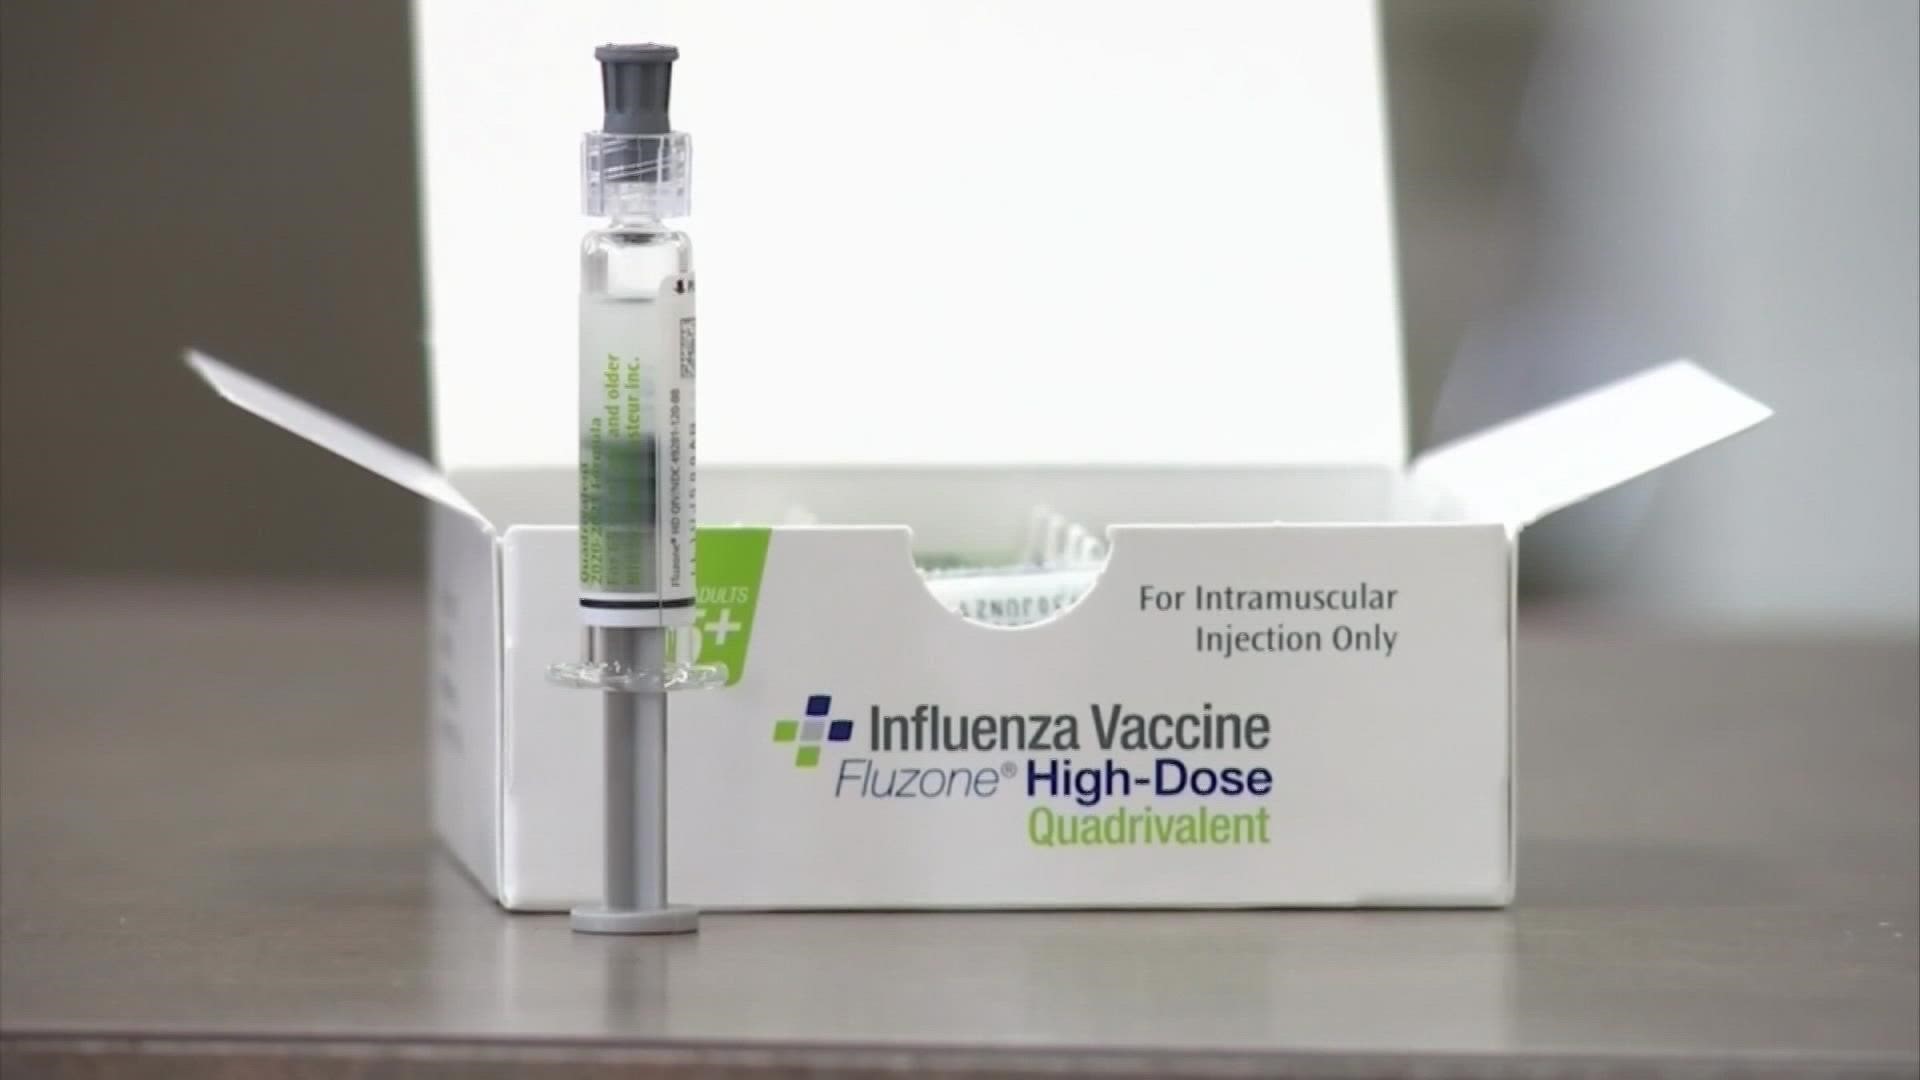 The CDC is reporting in its latest data about flu vaccines, vaccines in kids are down by about 6% between 2020 and 2021. OhioHealth says their numbers are down too.